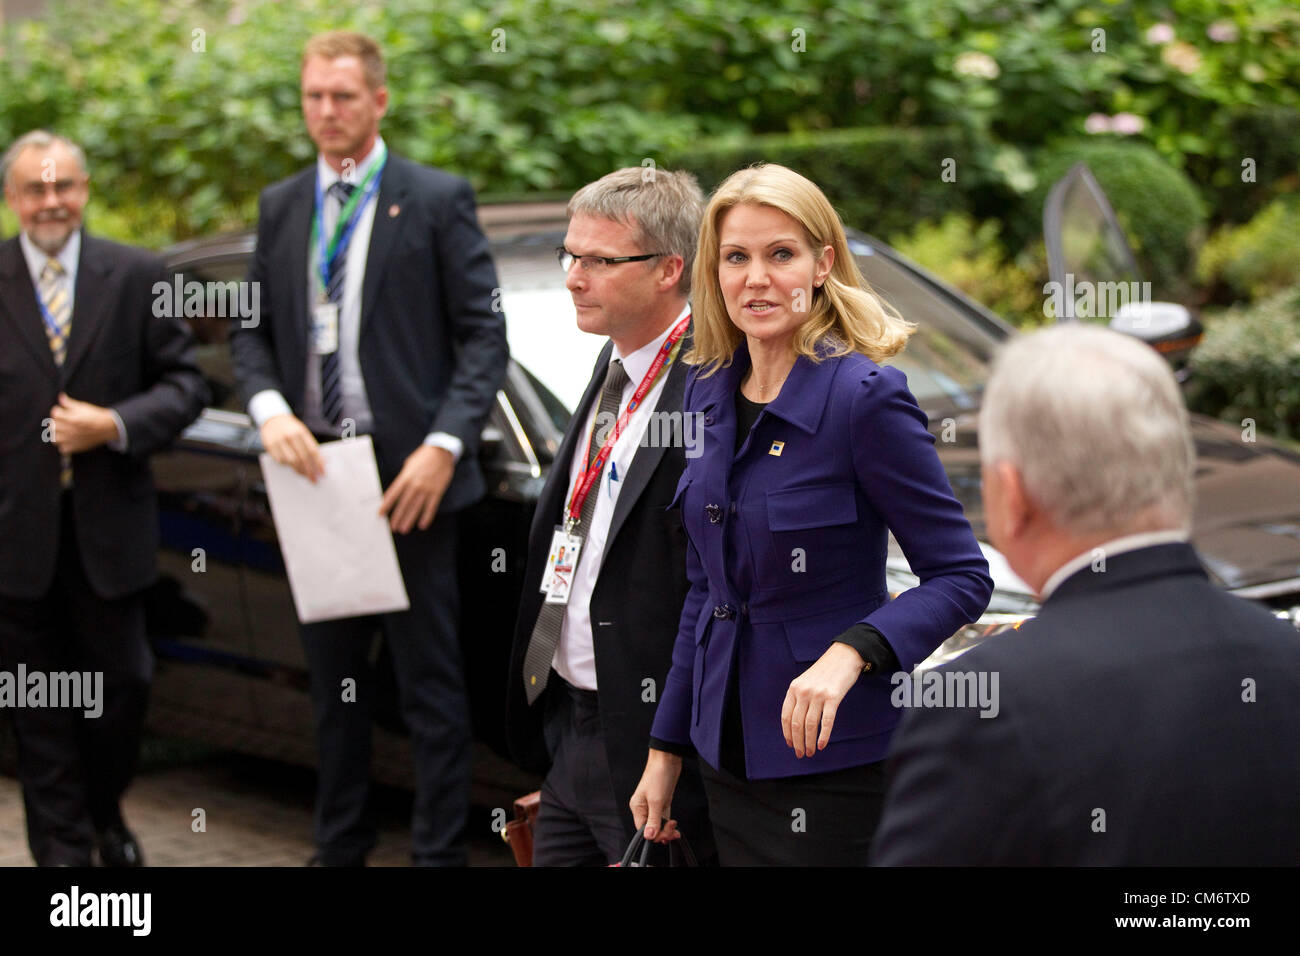 Brussels, Belgium. 18th October 2012. Helle Thorning-Schmidt, Prime Minister of Denmark arriving at the European Council meeting in Brussels, Justus Lipsius Building.  Photo:Jeff Gilbert. 18.10.2012. Brussels, Belgium. Credit:  Jeff Gilbert / Alamy Live News Stock Photo